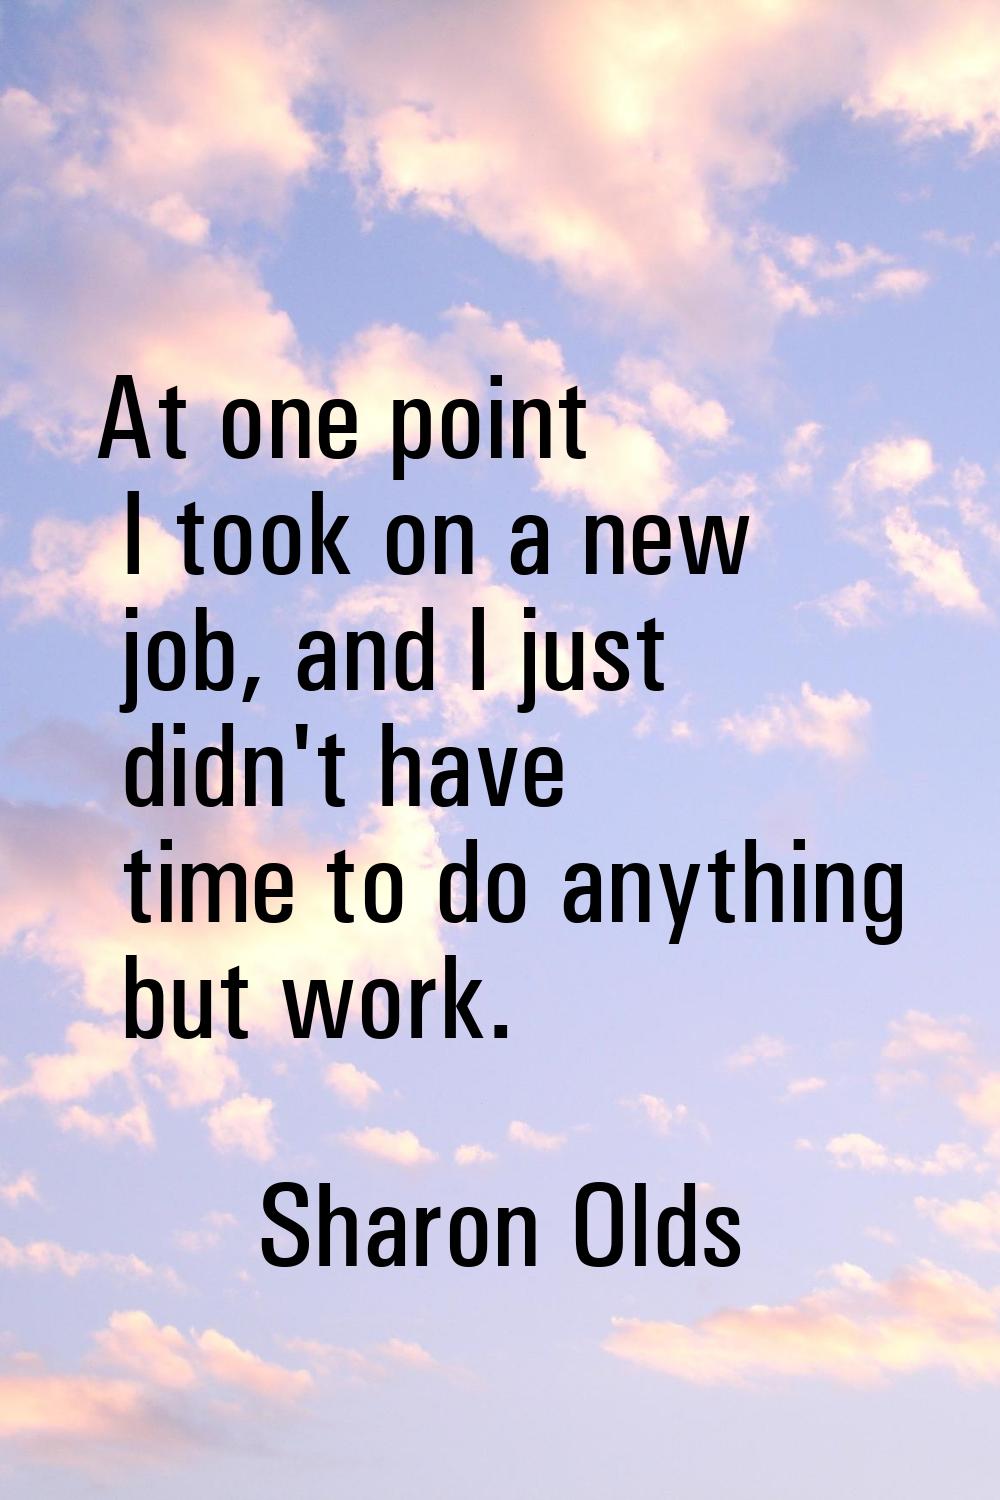 At one point I took on a new job, and I just didn't have time to do anything but work.